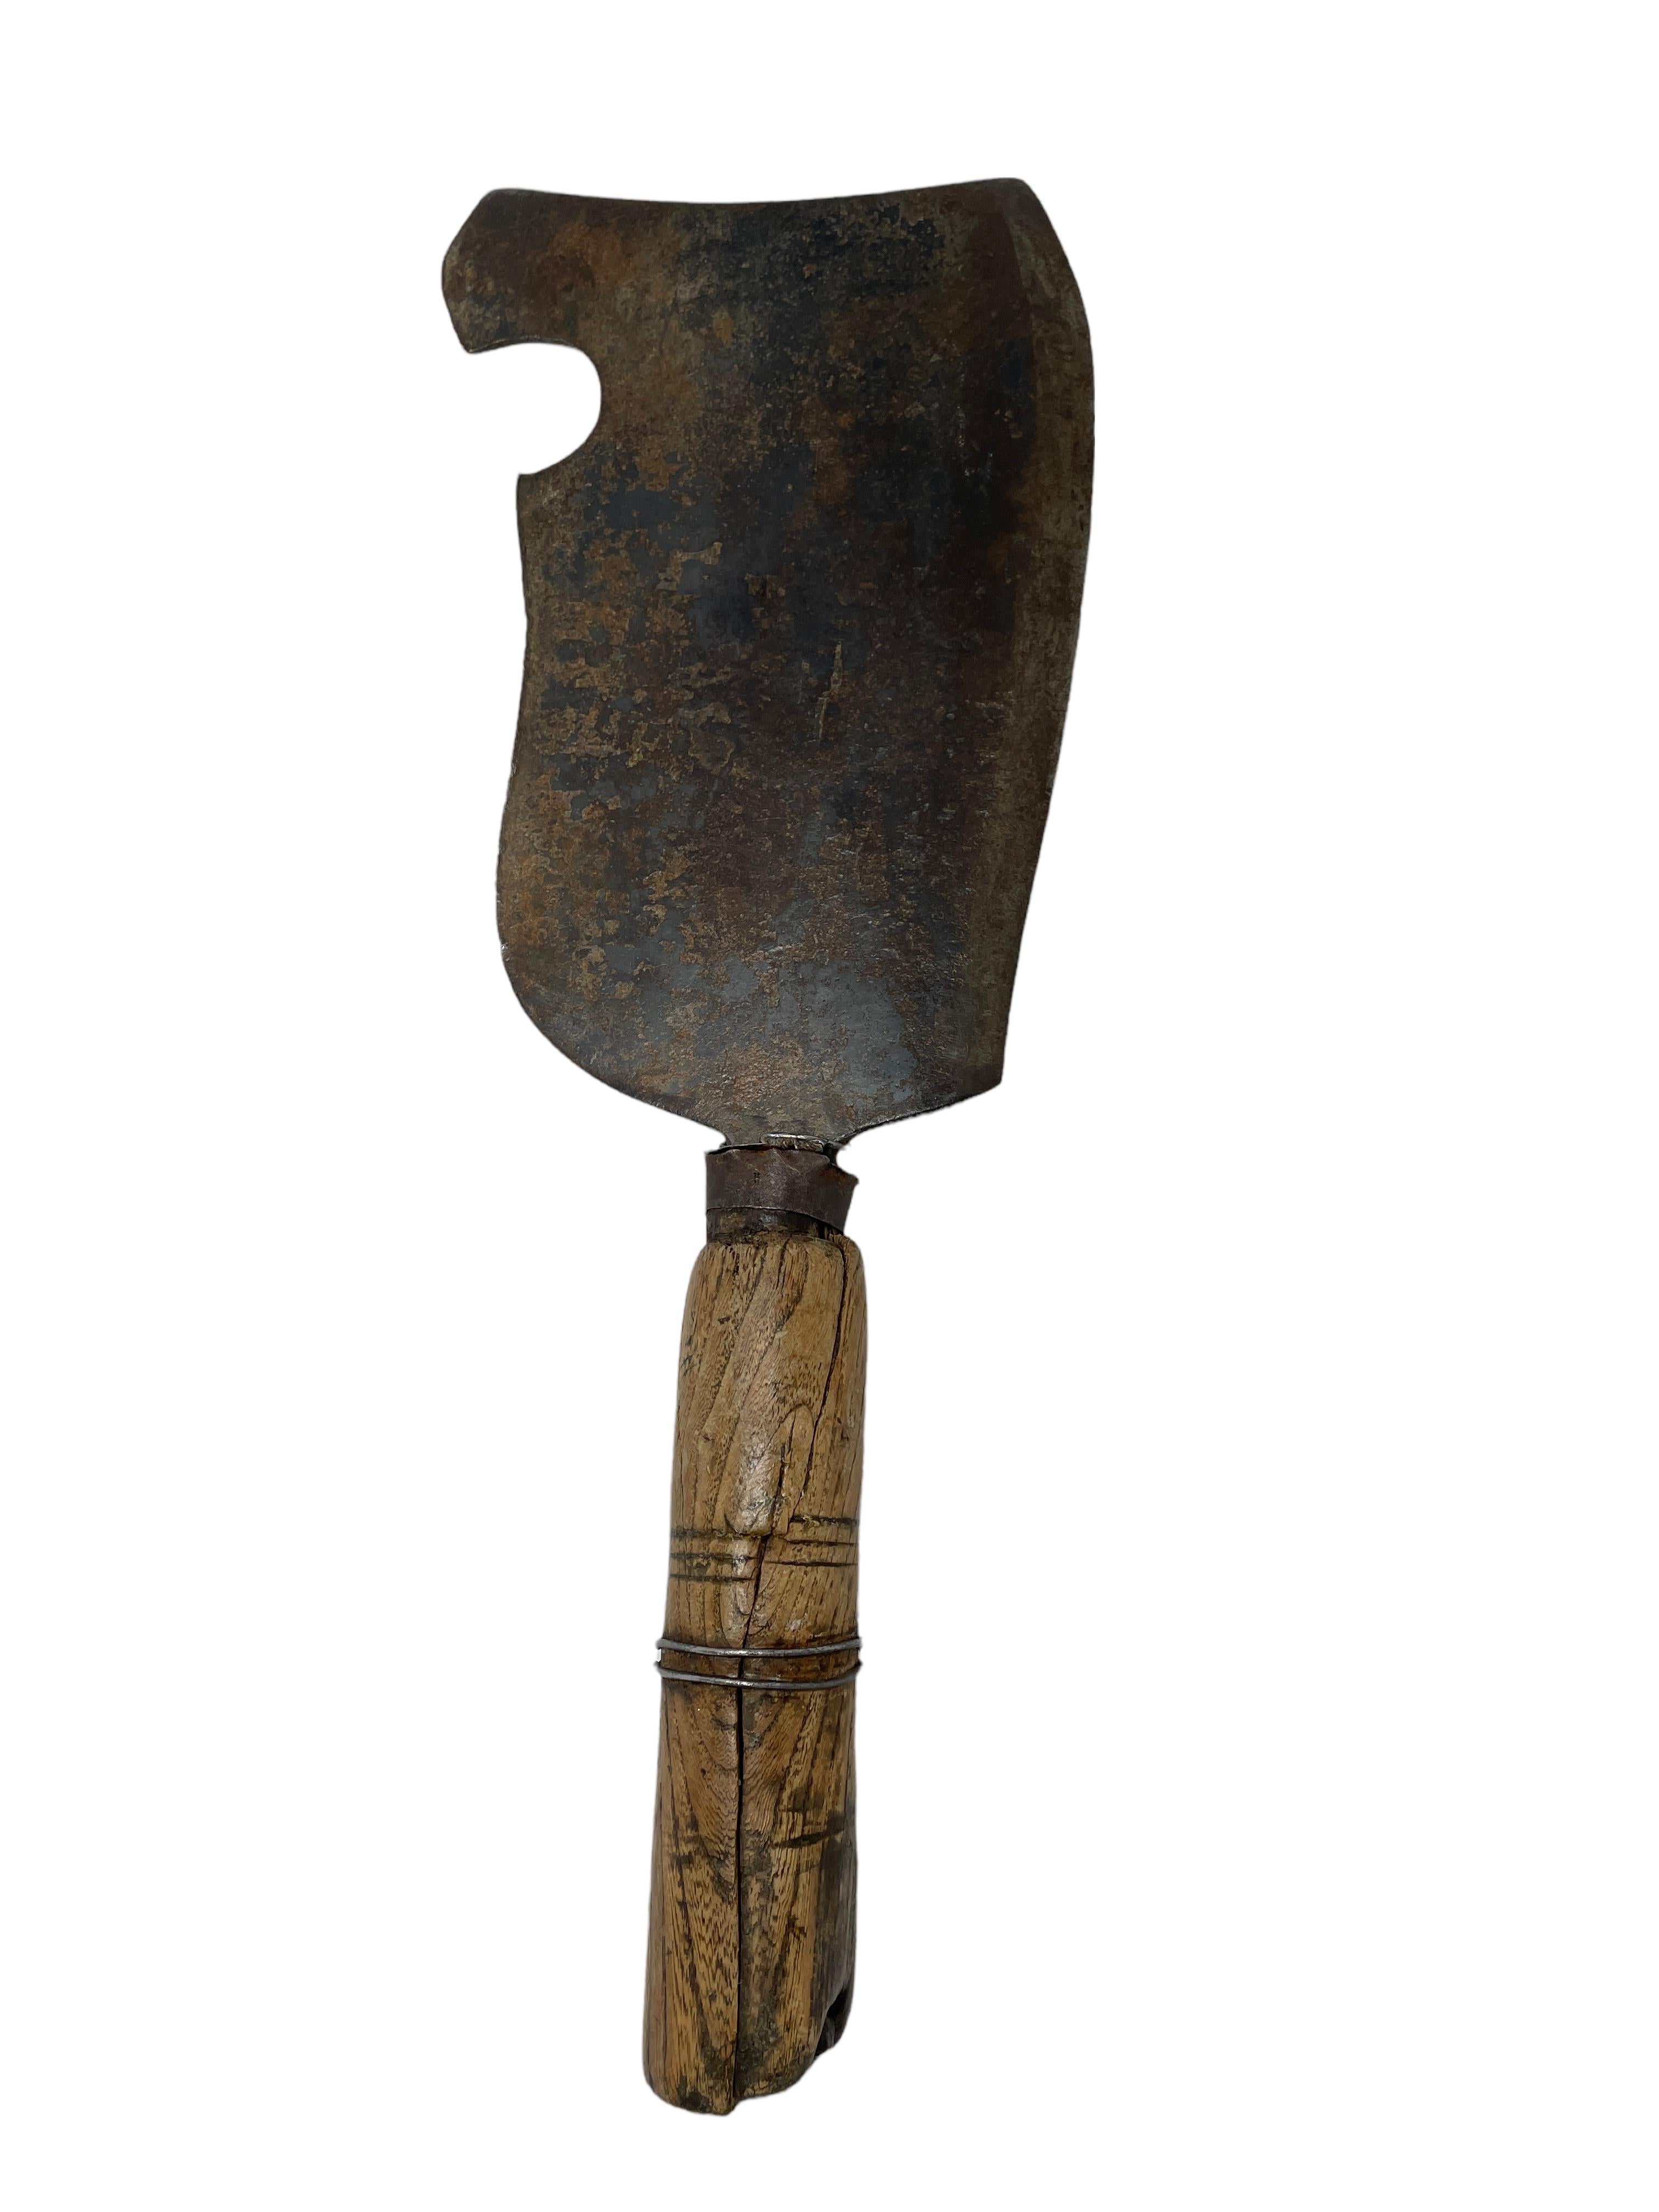 Antique 19th century European cleaver. Made from hand-wrought iron with wood handle. Great as a graphic wall decoration. Found at an estate sale in Bolzano; Italy. Nice to display with your Butcher Block.